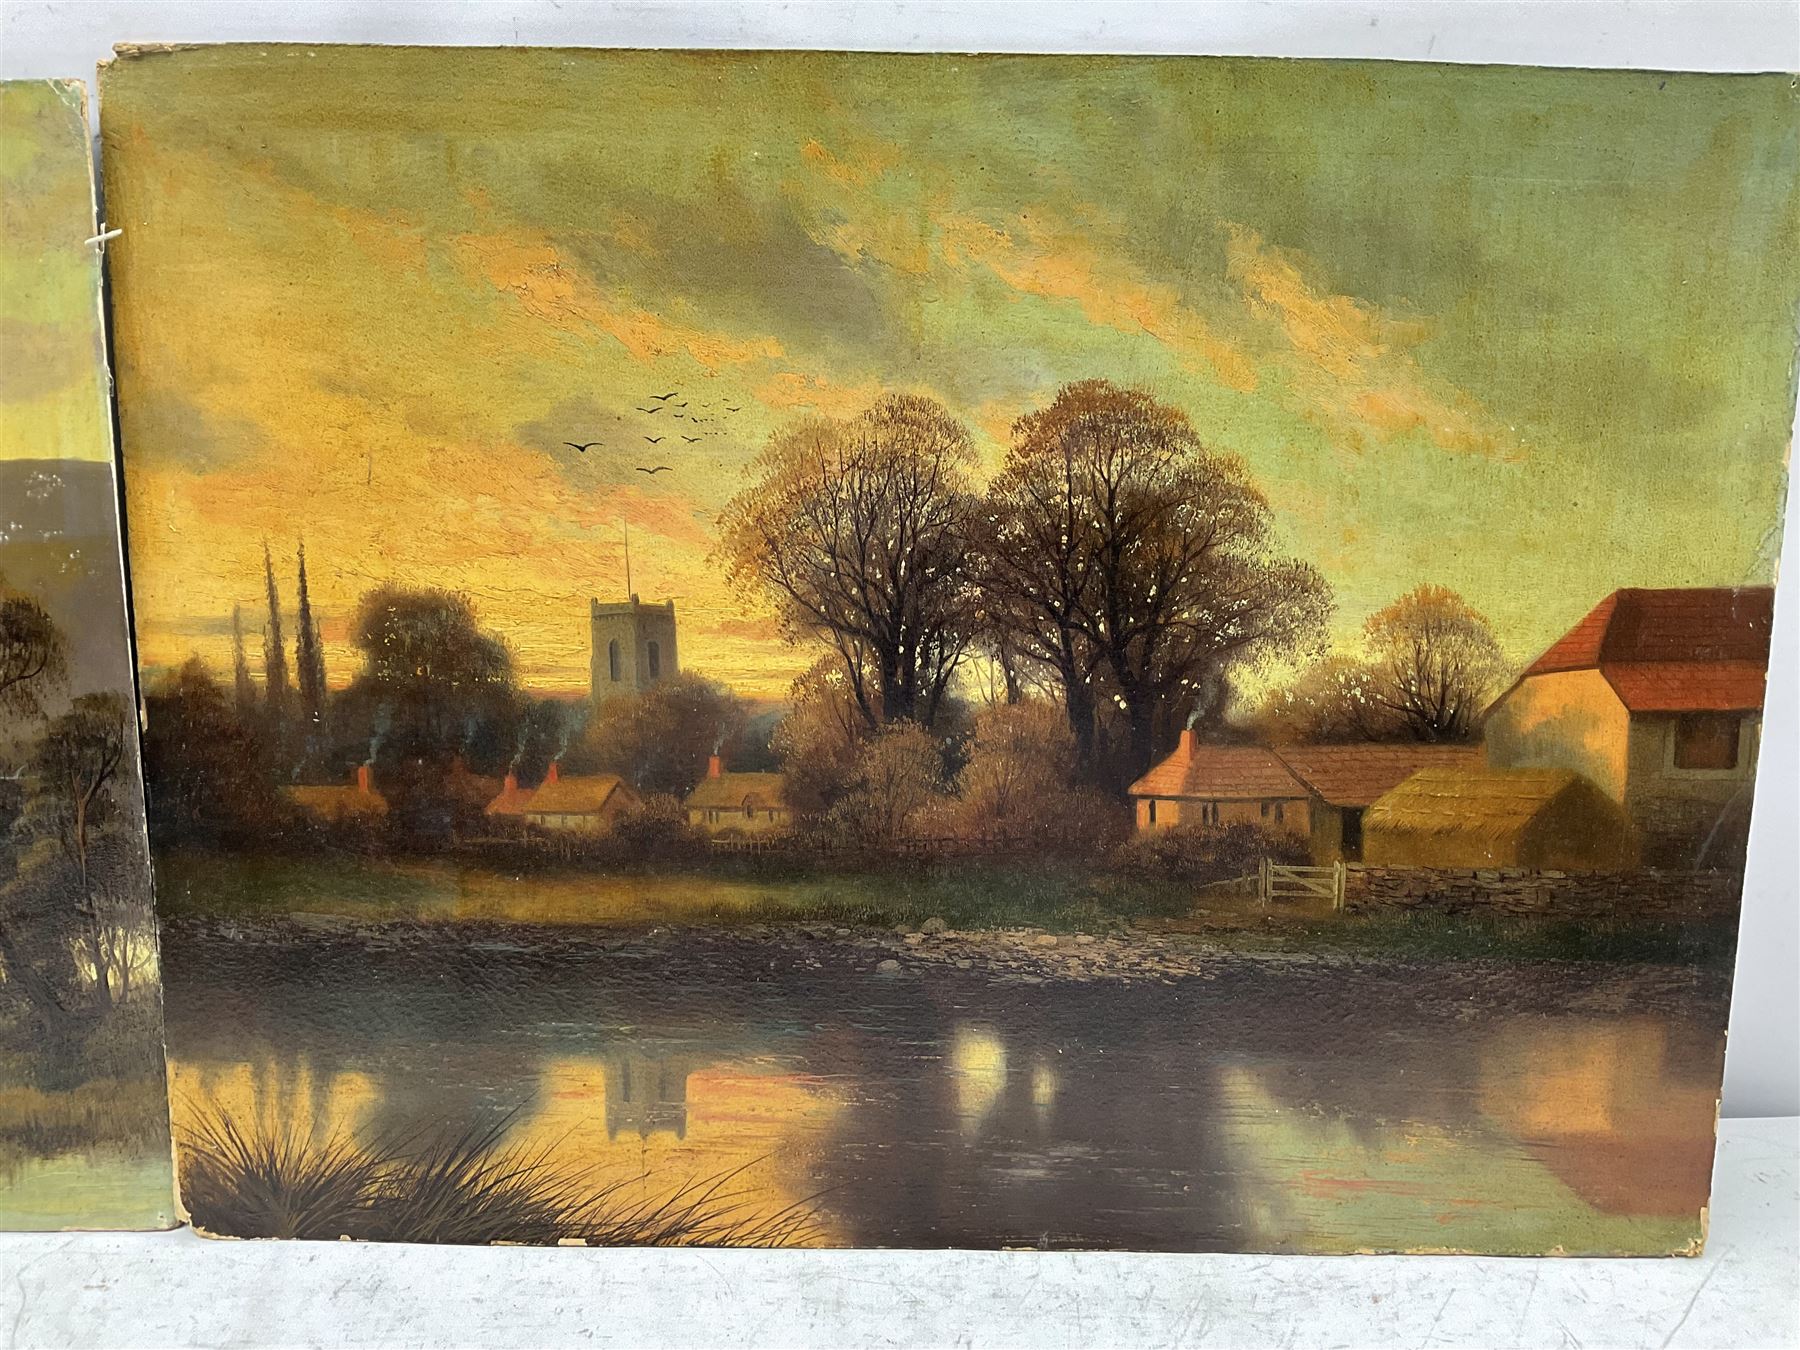 English School (19th century): Lakeland and River scenes at Sunset - Image 2 of 4